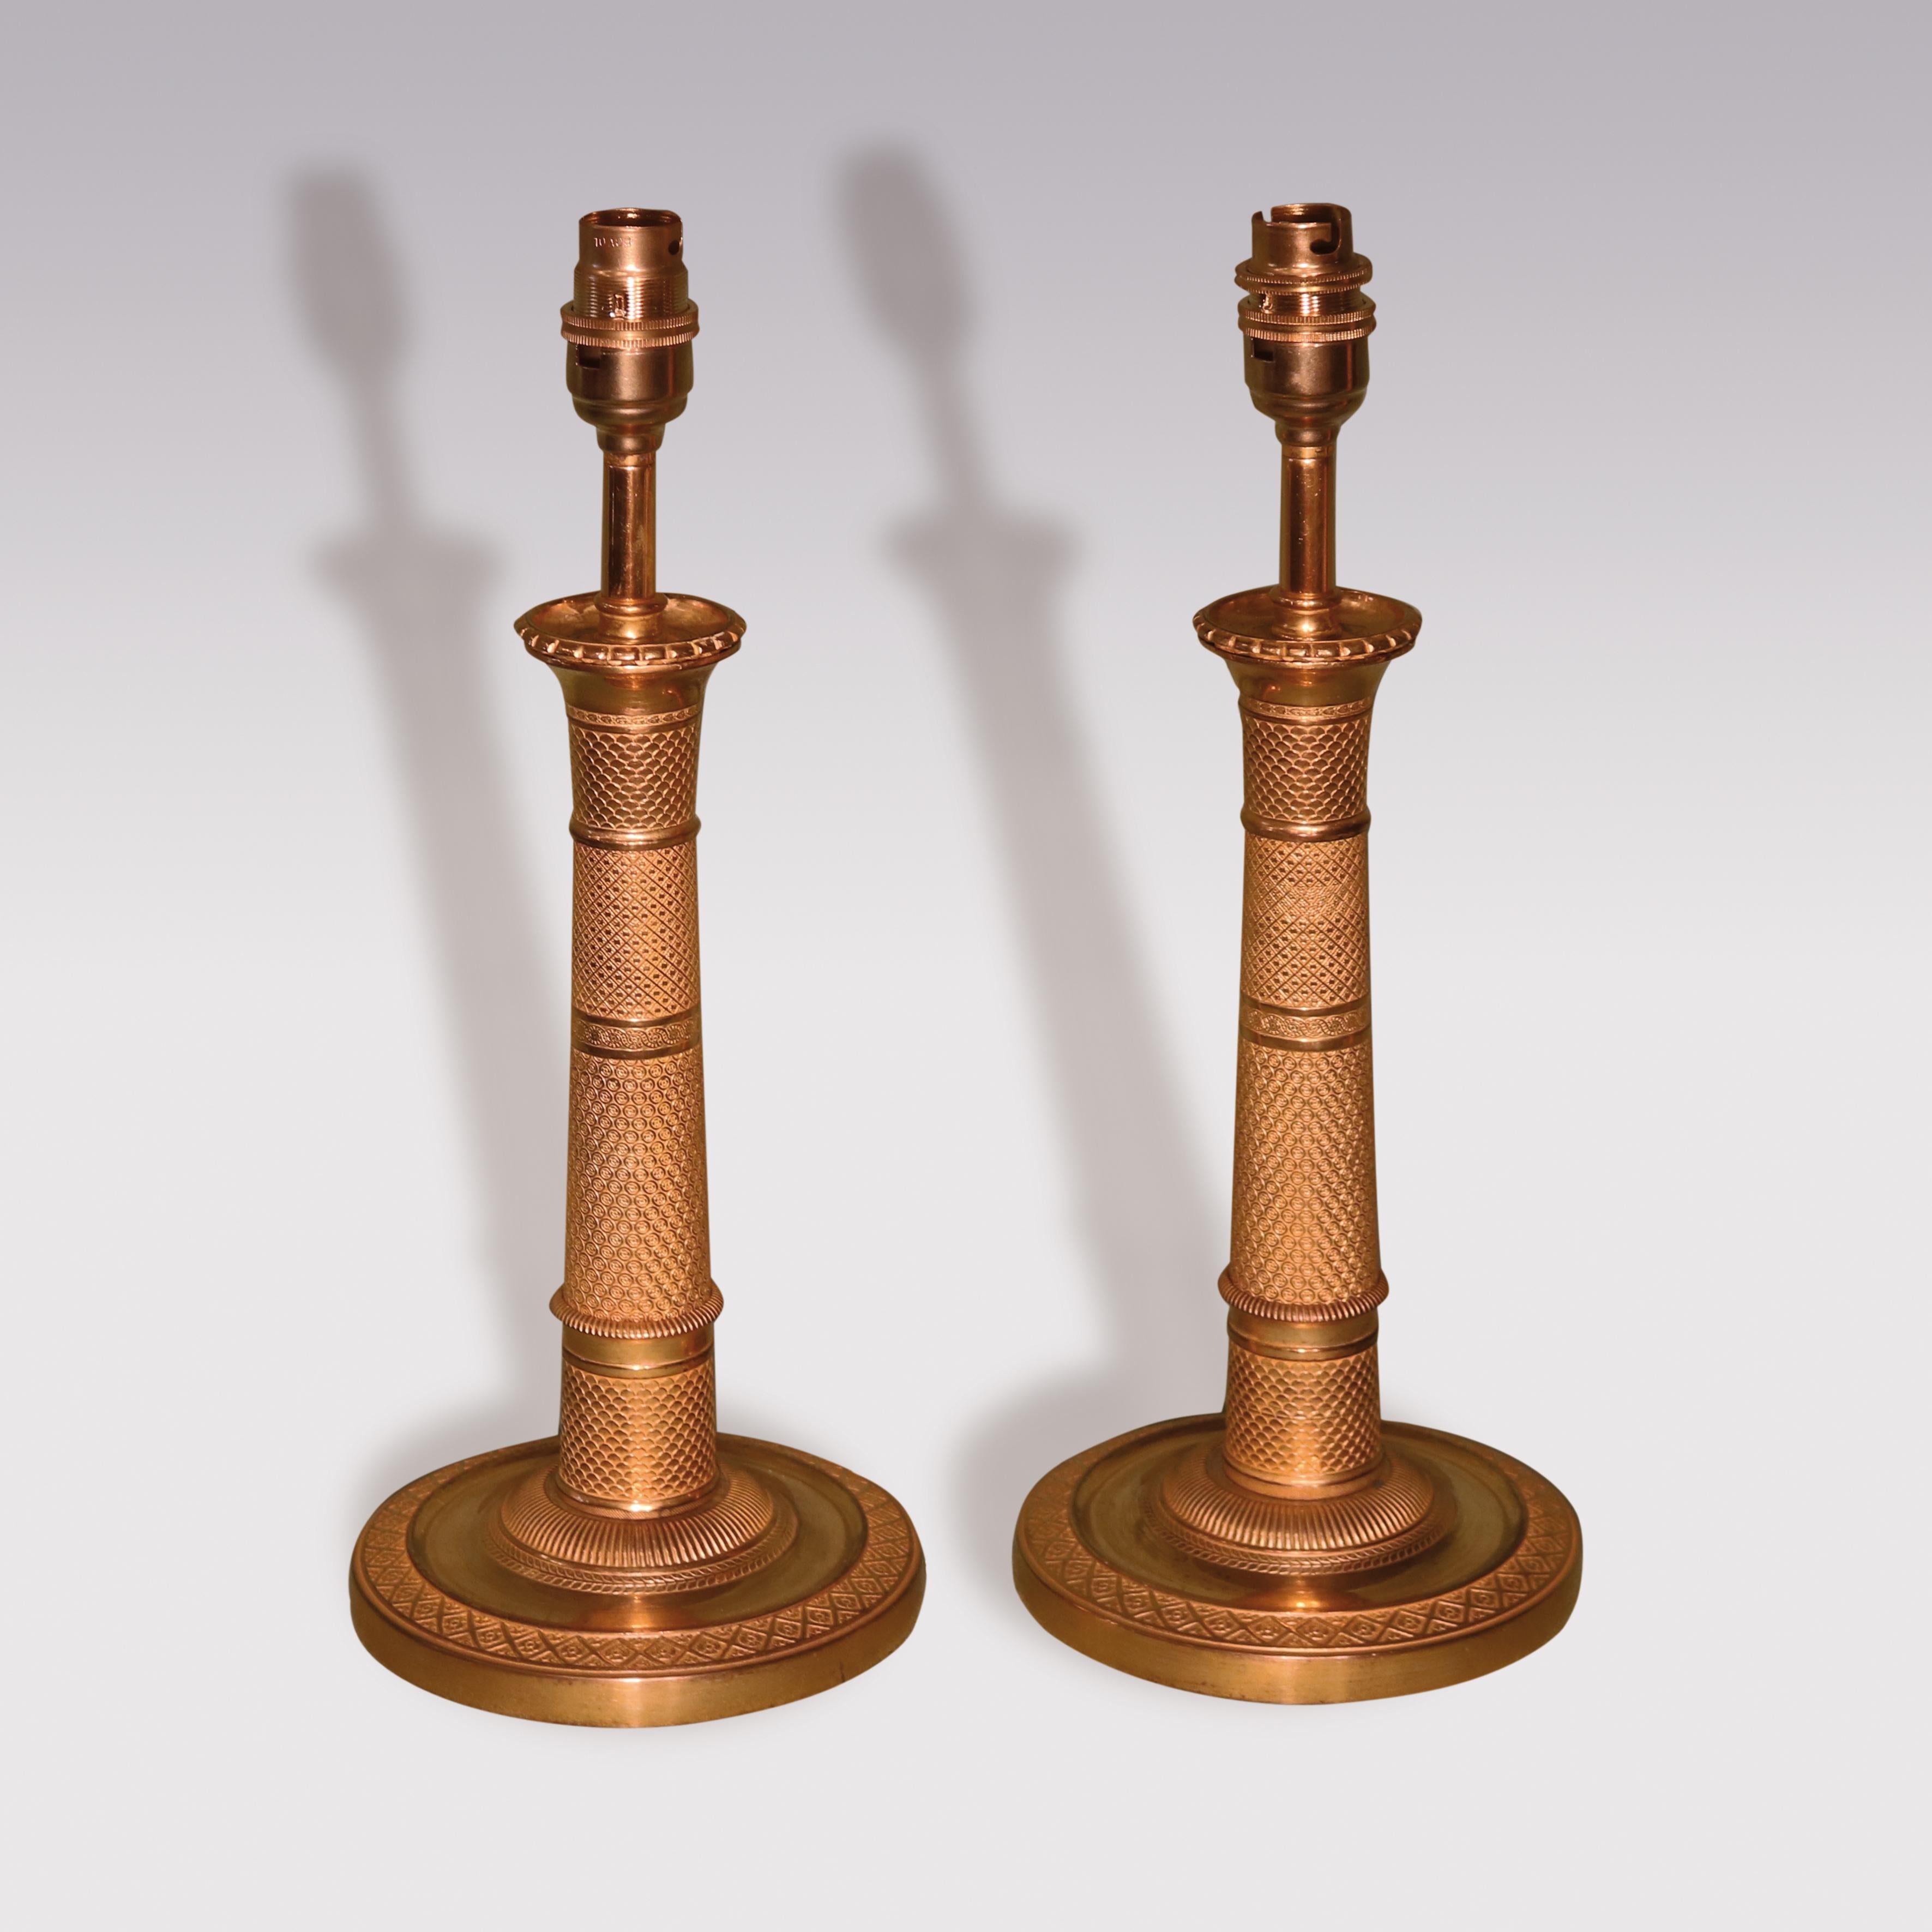 Pair of early 19th century ormolu candlesticks having unusual engine-turned “column” stems supported on circular bases. (Now converted to lamps)

Measures: Height of candlesticks 10